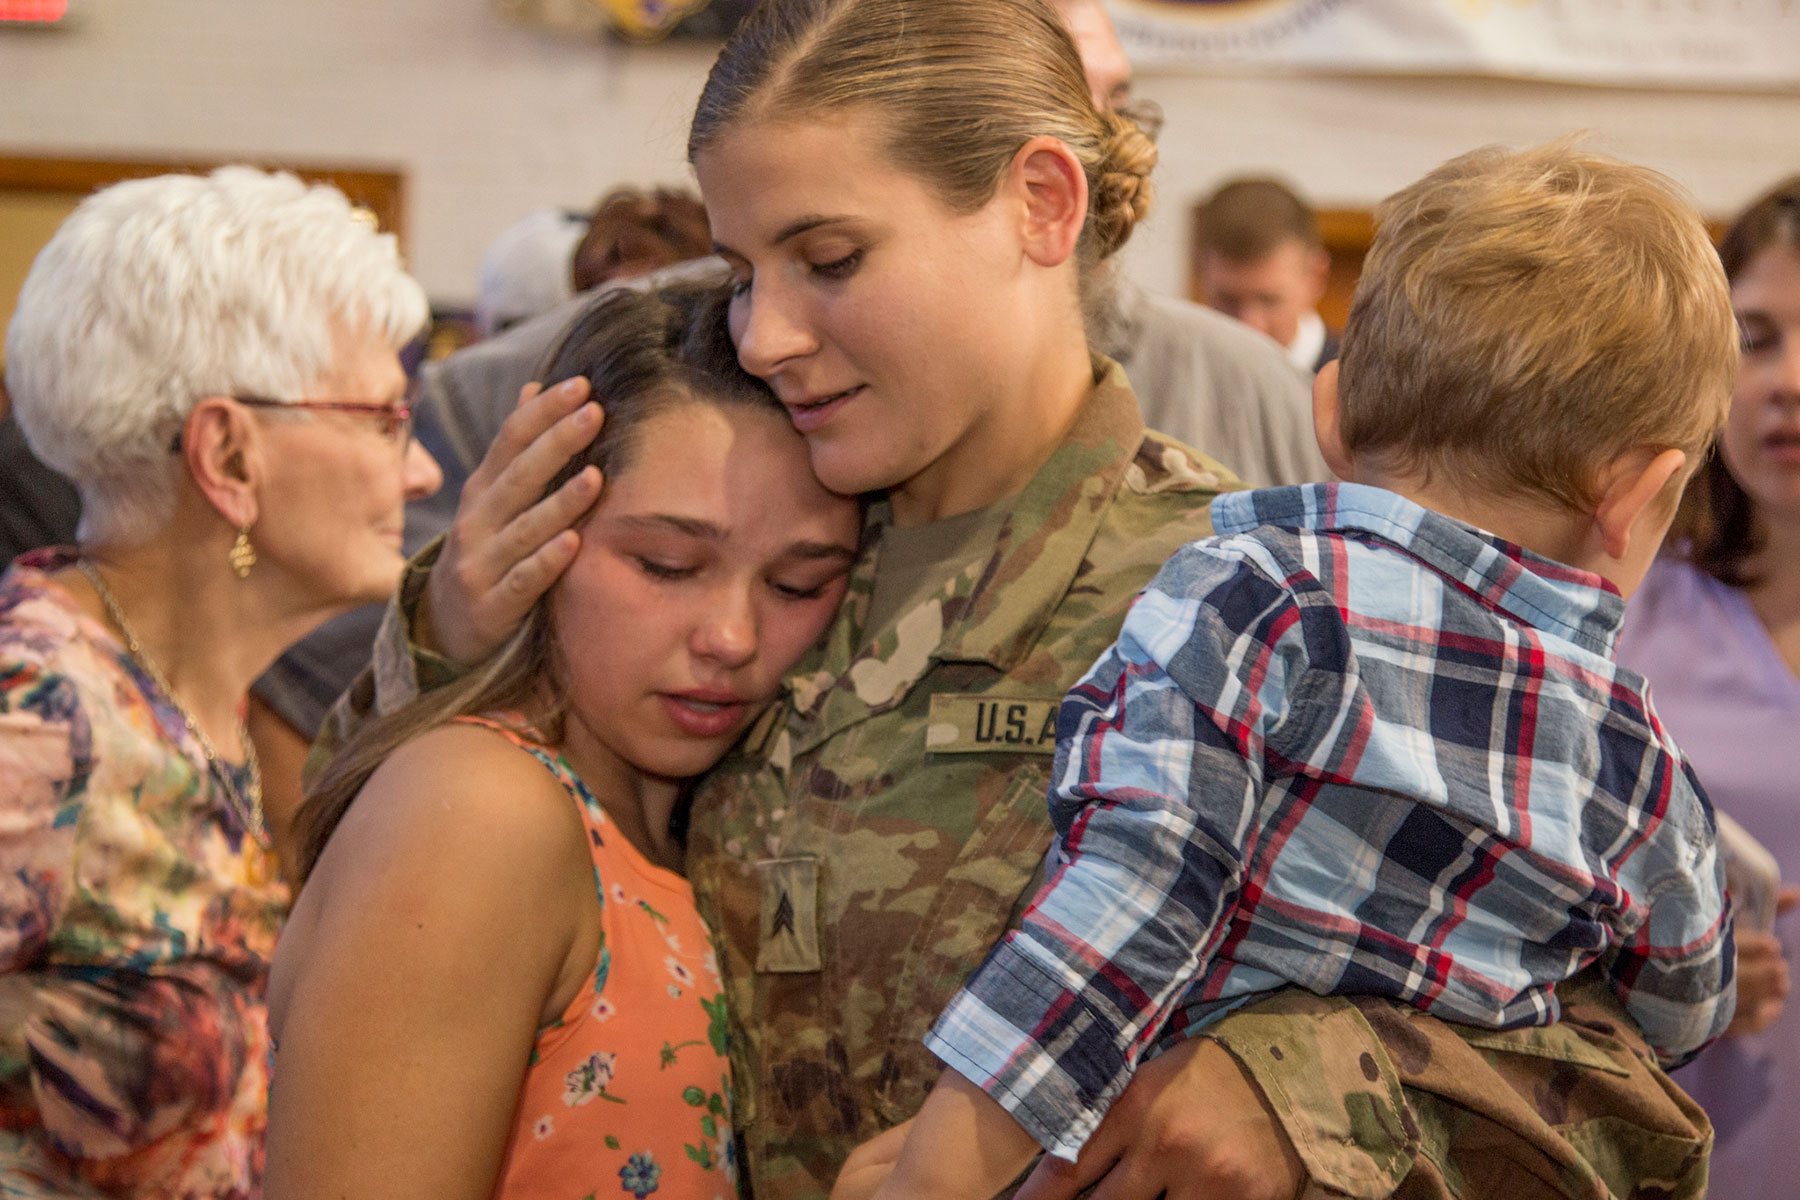 Sgt. Allison Catic, Company A, 248th Aviation Support Battalion, 67th Troop Command, Iowa Army National Guard, embraces her children following the unit’s send-off ceremony at Cedar Falls, Iowa, on Sept. 29, 2017. (U.S. Army National Guard/Tawny Schmit)